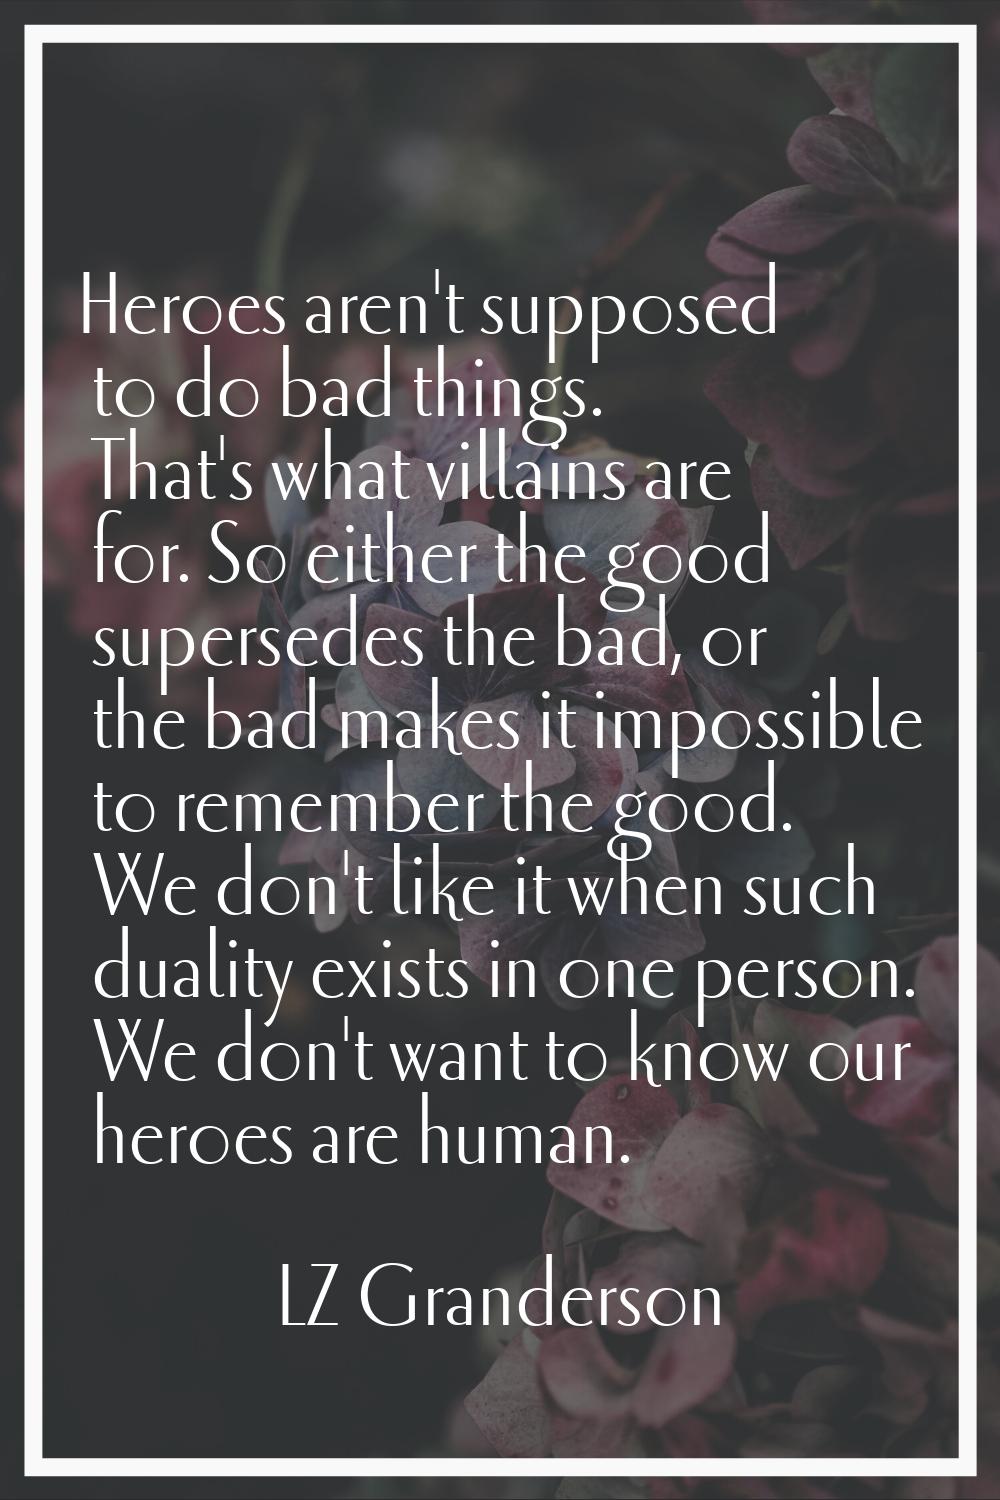 Heroes aren't supposed to do bad things. That's what villains are for. So either the good supersede